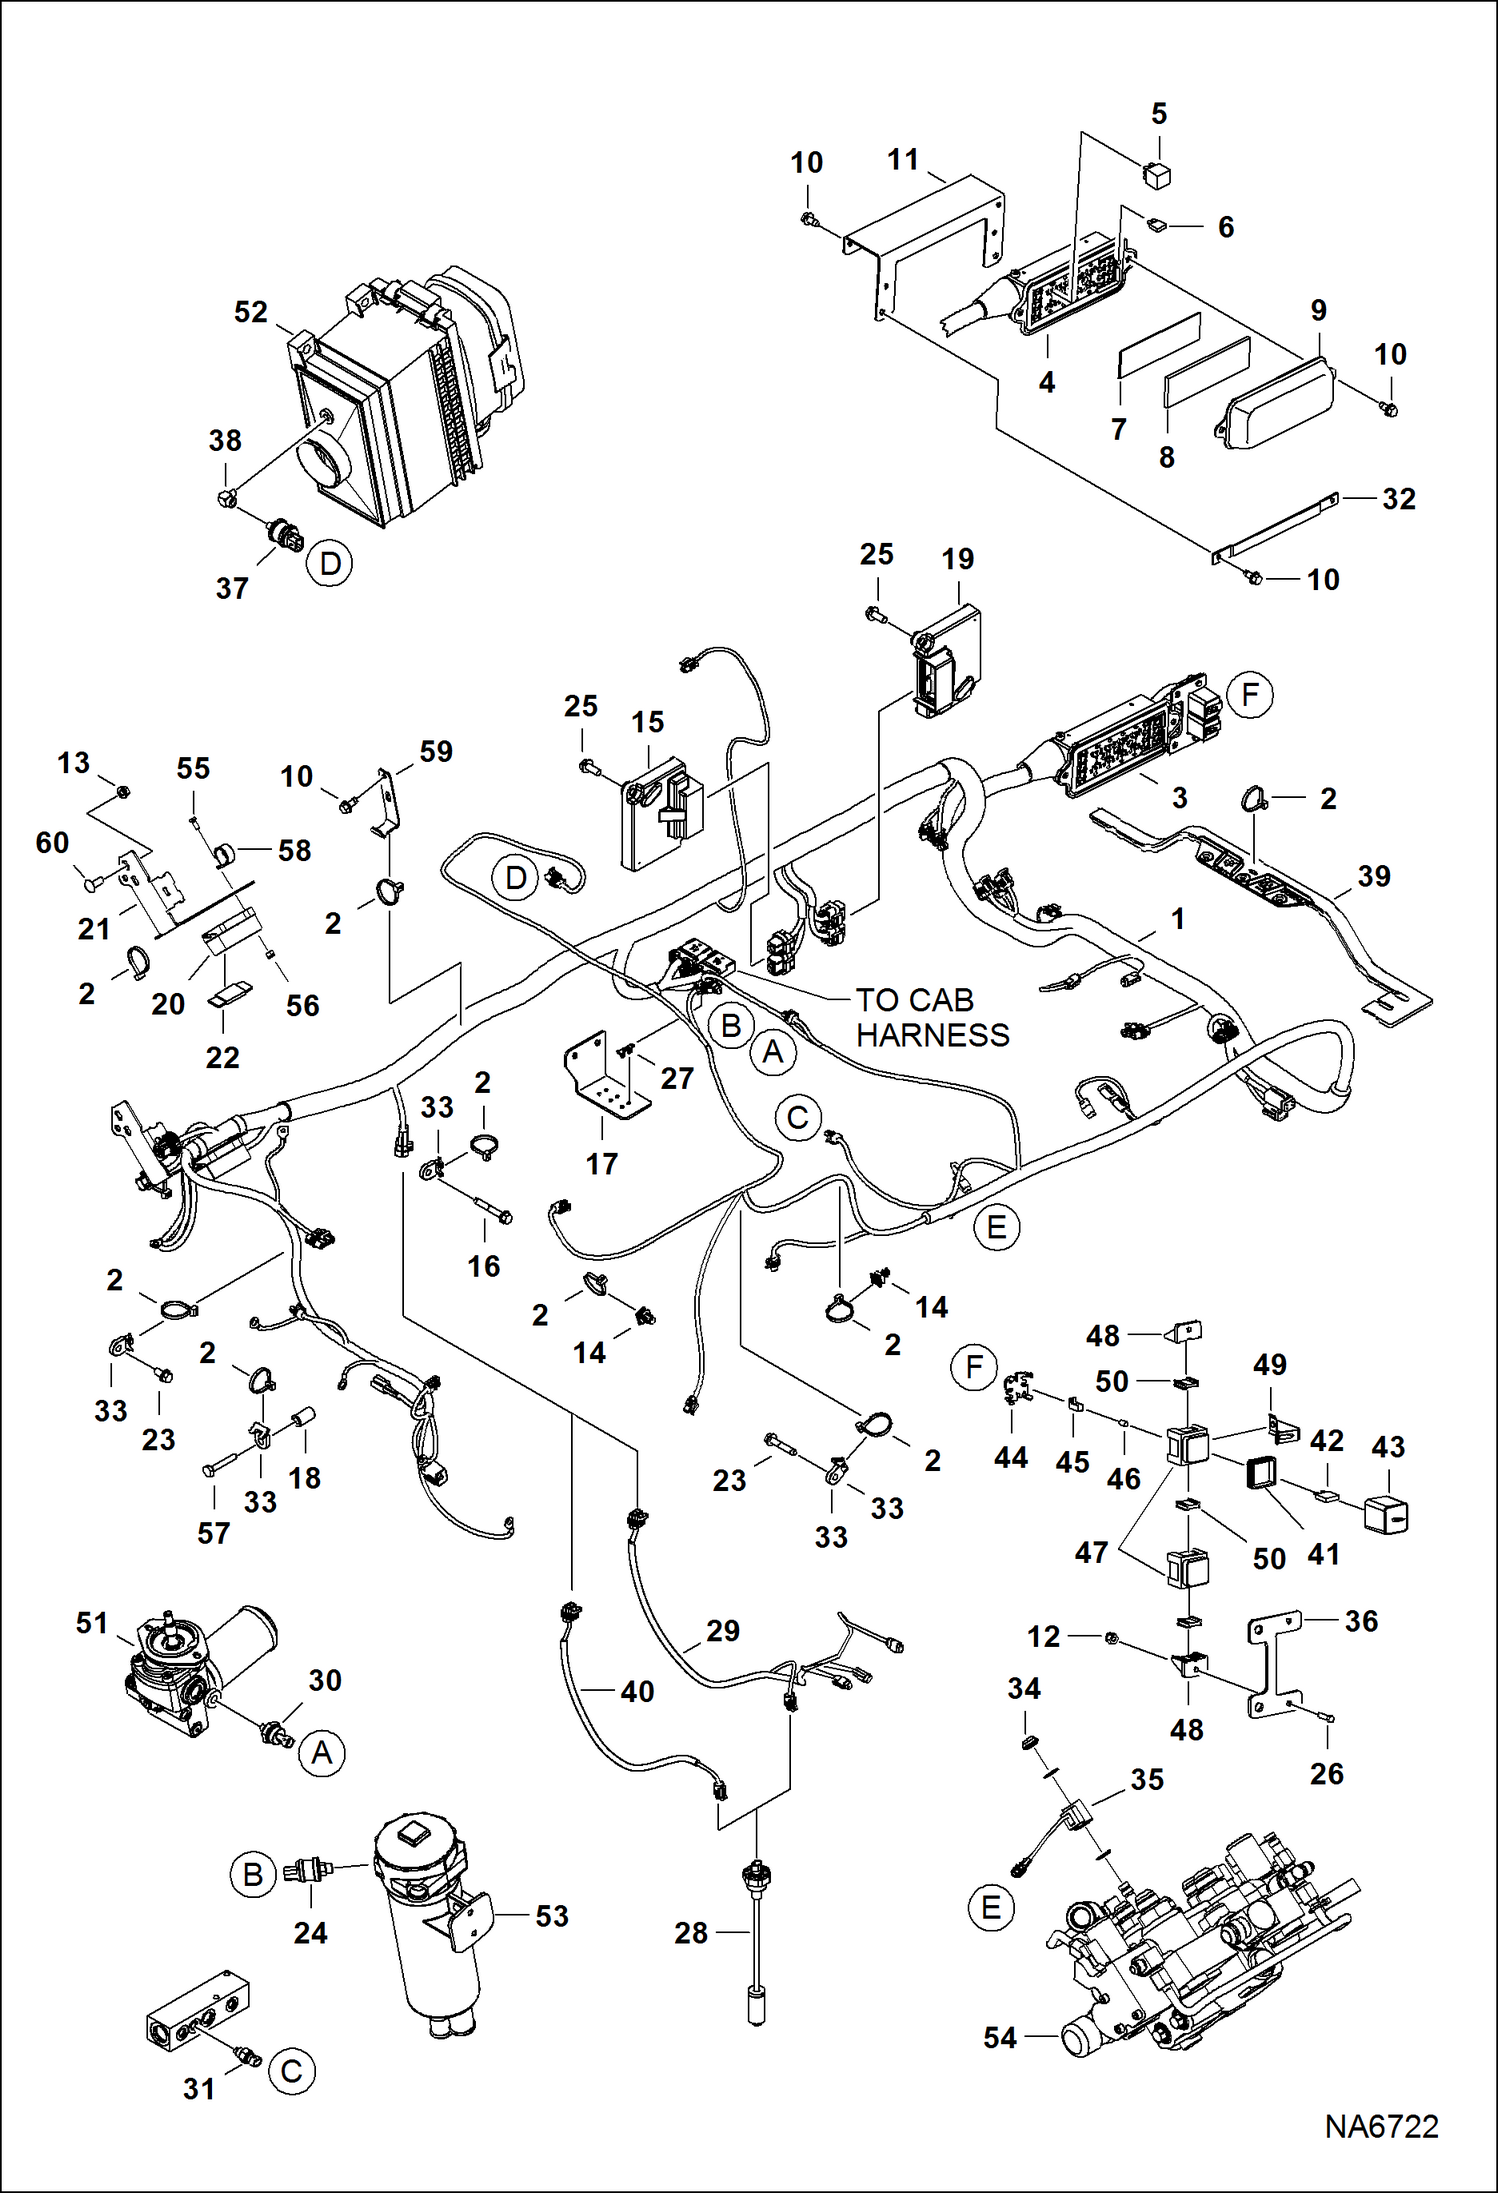 Схема запчастей Bobcat A-Series - ENGINE ELECTRICAL CIRCUITRY (Frame Harness & Filter Sensors) (S/N A3P612363 & Above, A3P712203 & Above) ELECTRICAL SYSTEM